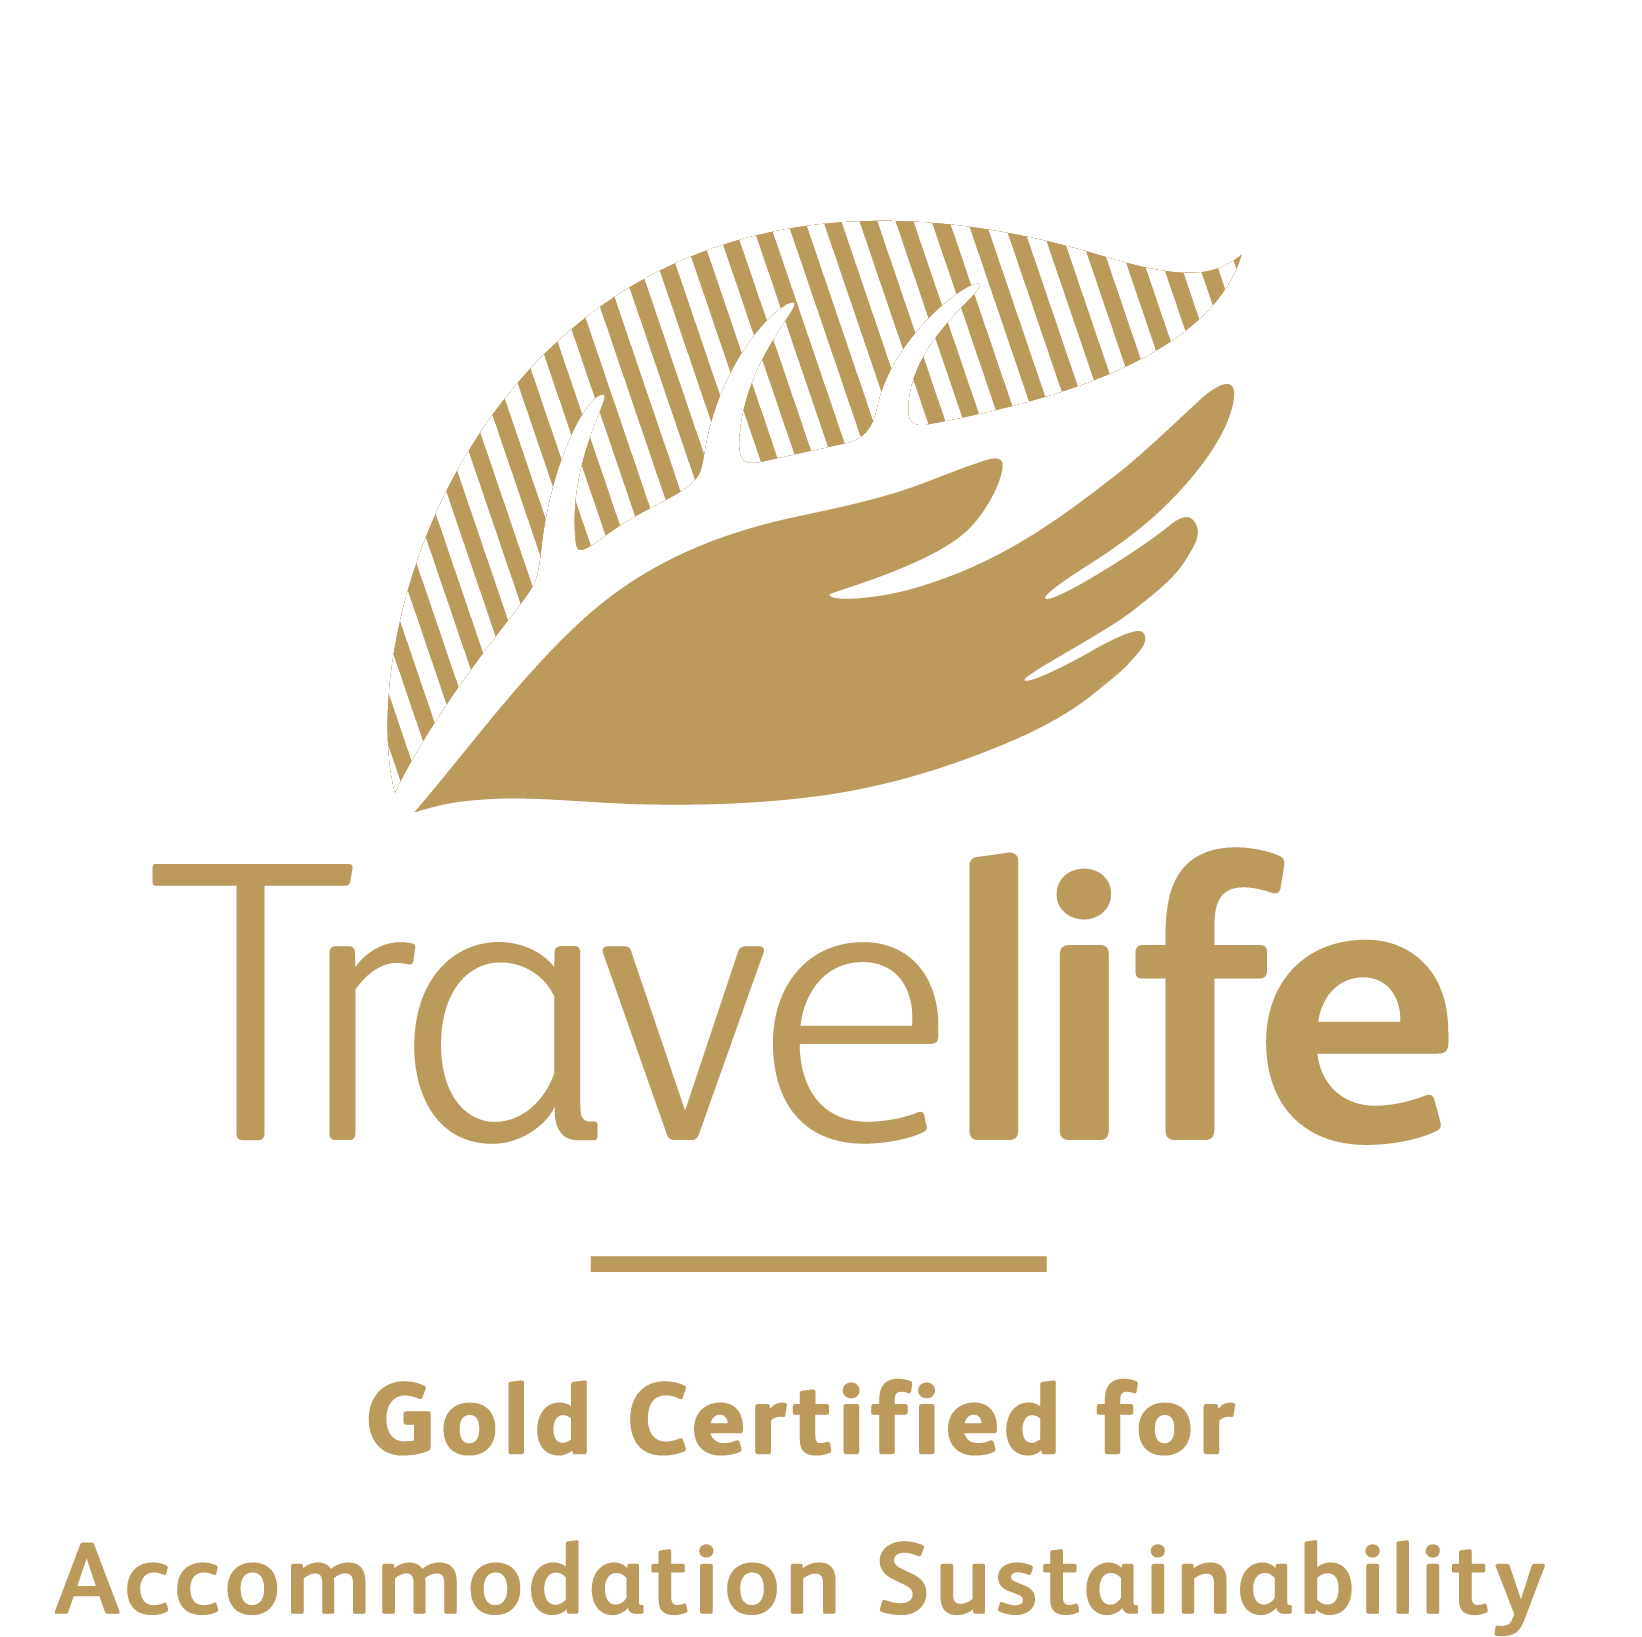 Travelife Gold Certified for Accommodation Sustainability at TN